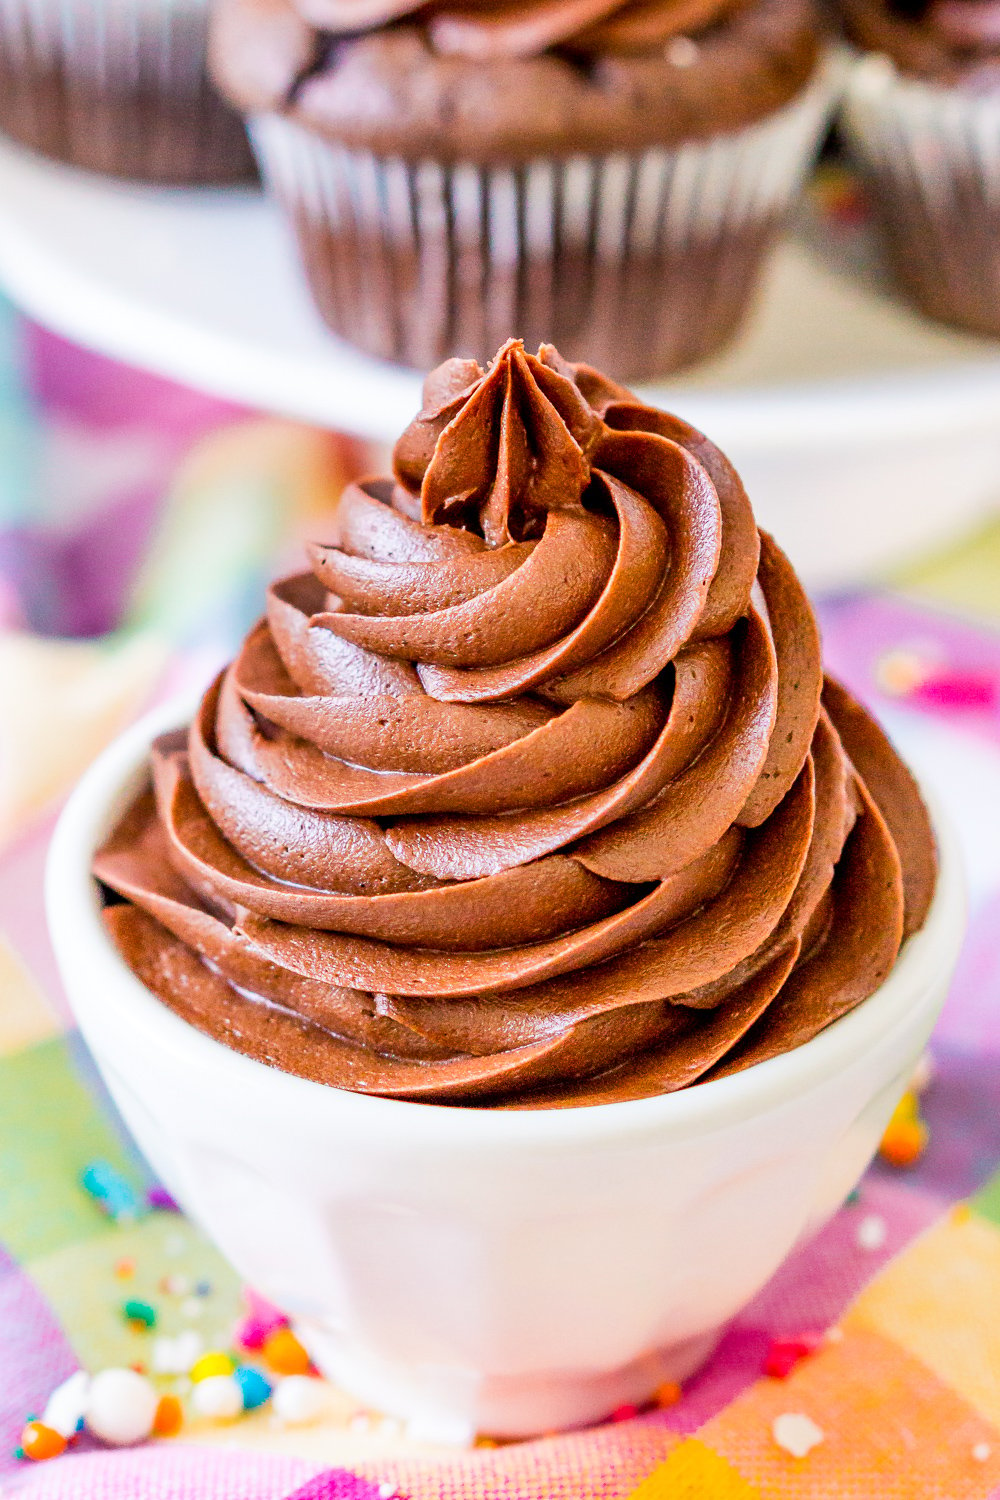 The BEST Chocolate Buttercream Frosting recipe made with chocolate liqueur and whipped to perfection. It's a must for topping cakes and cupcakes or simply licking from the bowl.